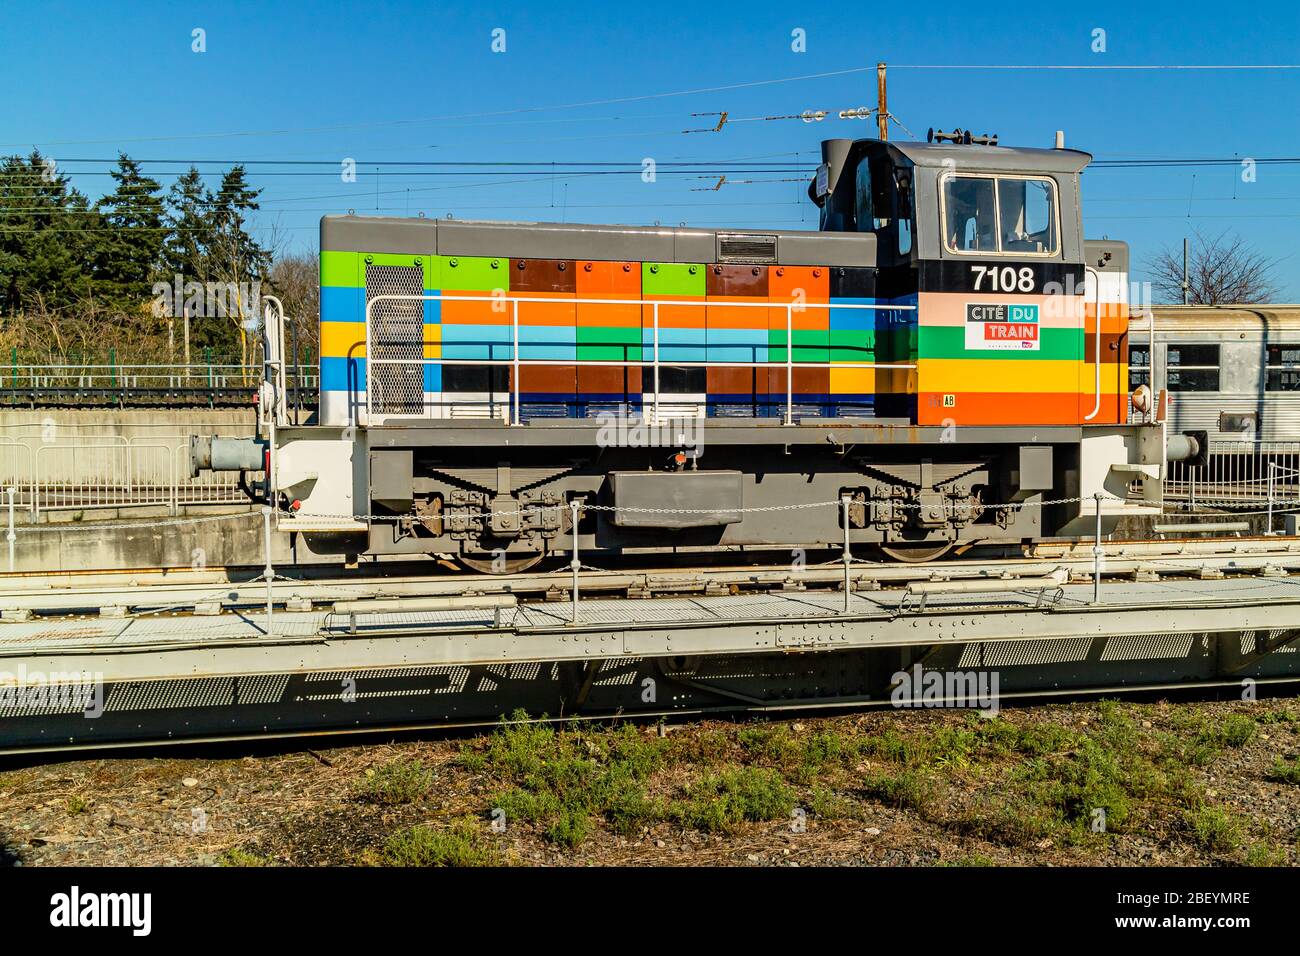 SNCF 7108, a Class Y 7100 diesel shunting engine built in 1958, now on display in the Cité du Train railway museum in Mulhouse, France. February 2020. Stock Photo